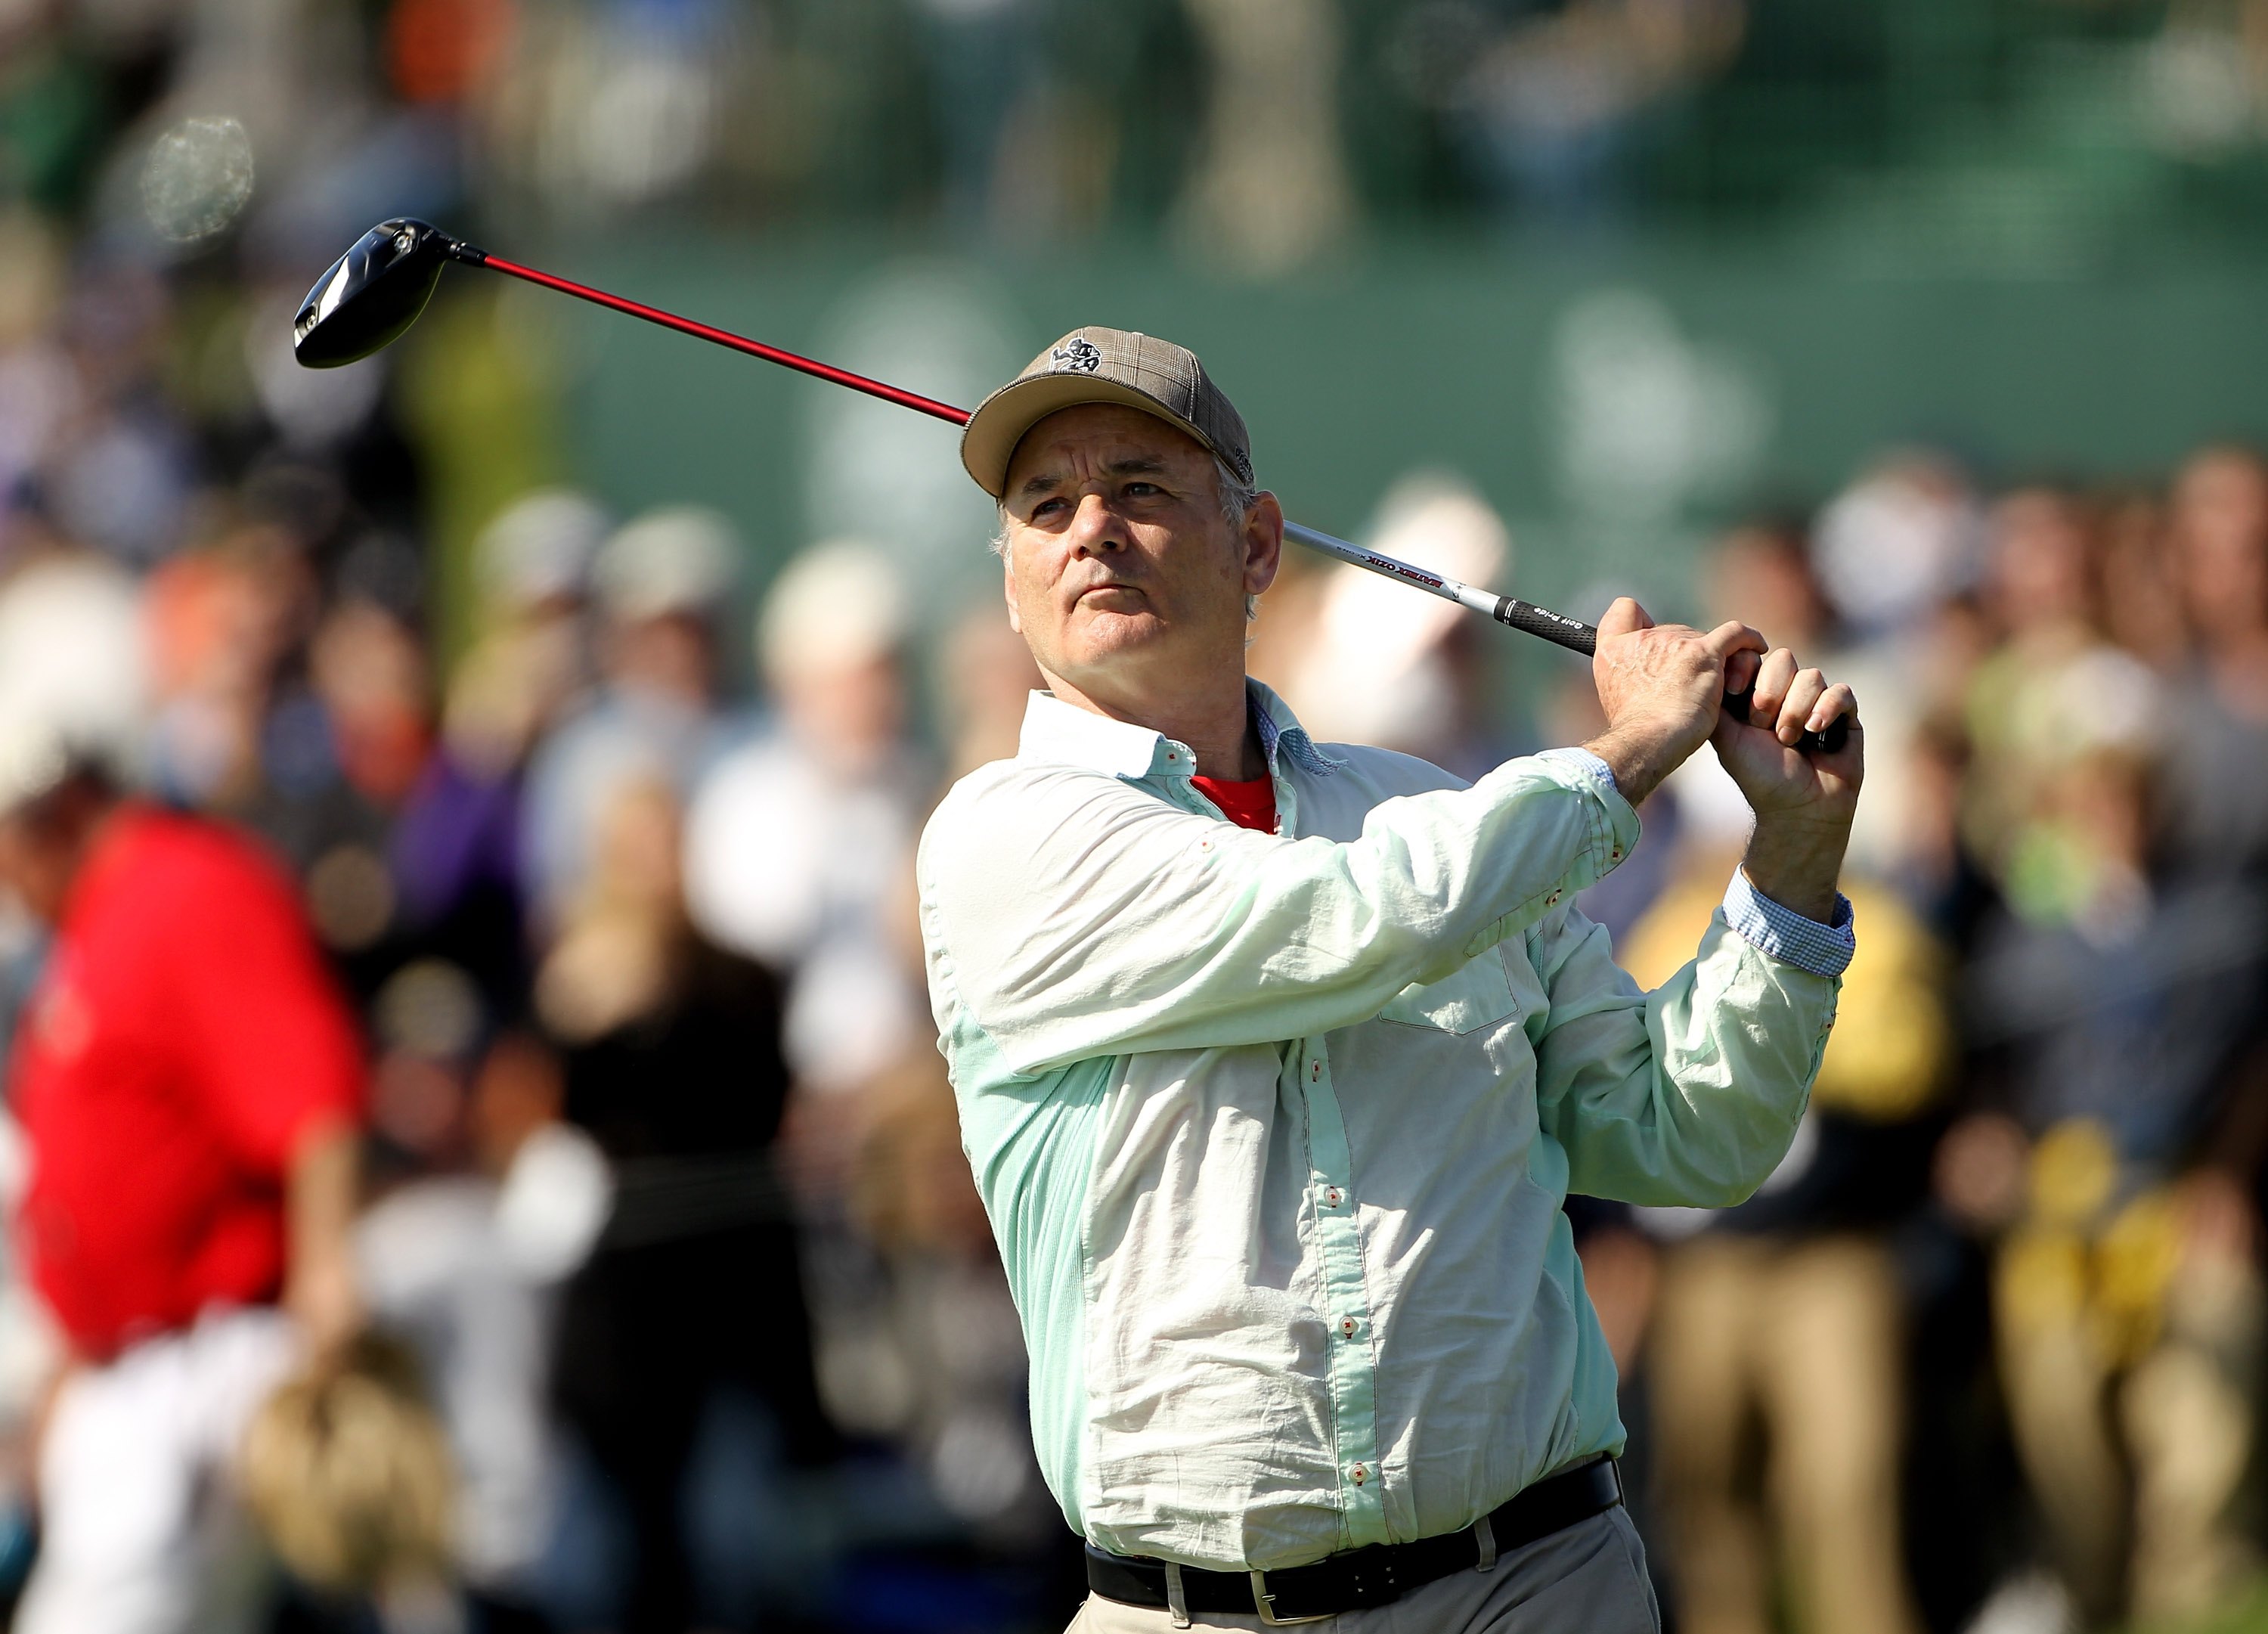 PEBBLE BEACH, CA - FEBRUARY 13:  Actor Bill Murray in action during round three of the AT&T Pebble Beach National Pro-Am at Pebble Beach Golf Links on February 13, 2010 in Pebble Beach, California.  (Photo by Ezra Shaw/Getty Images)